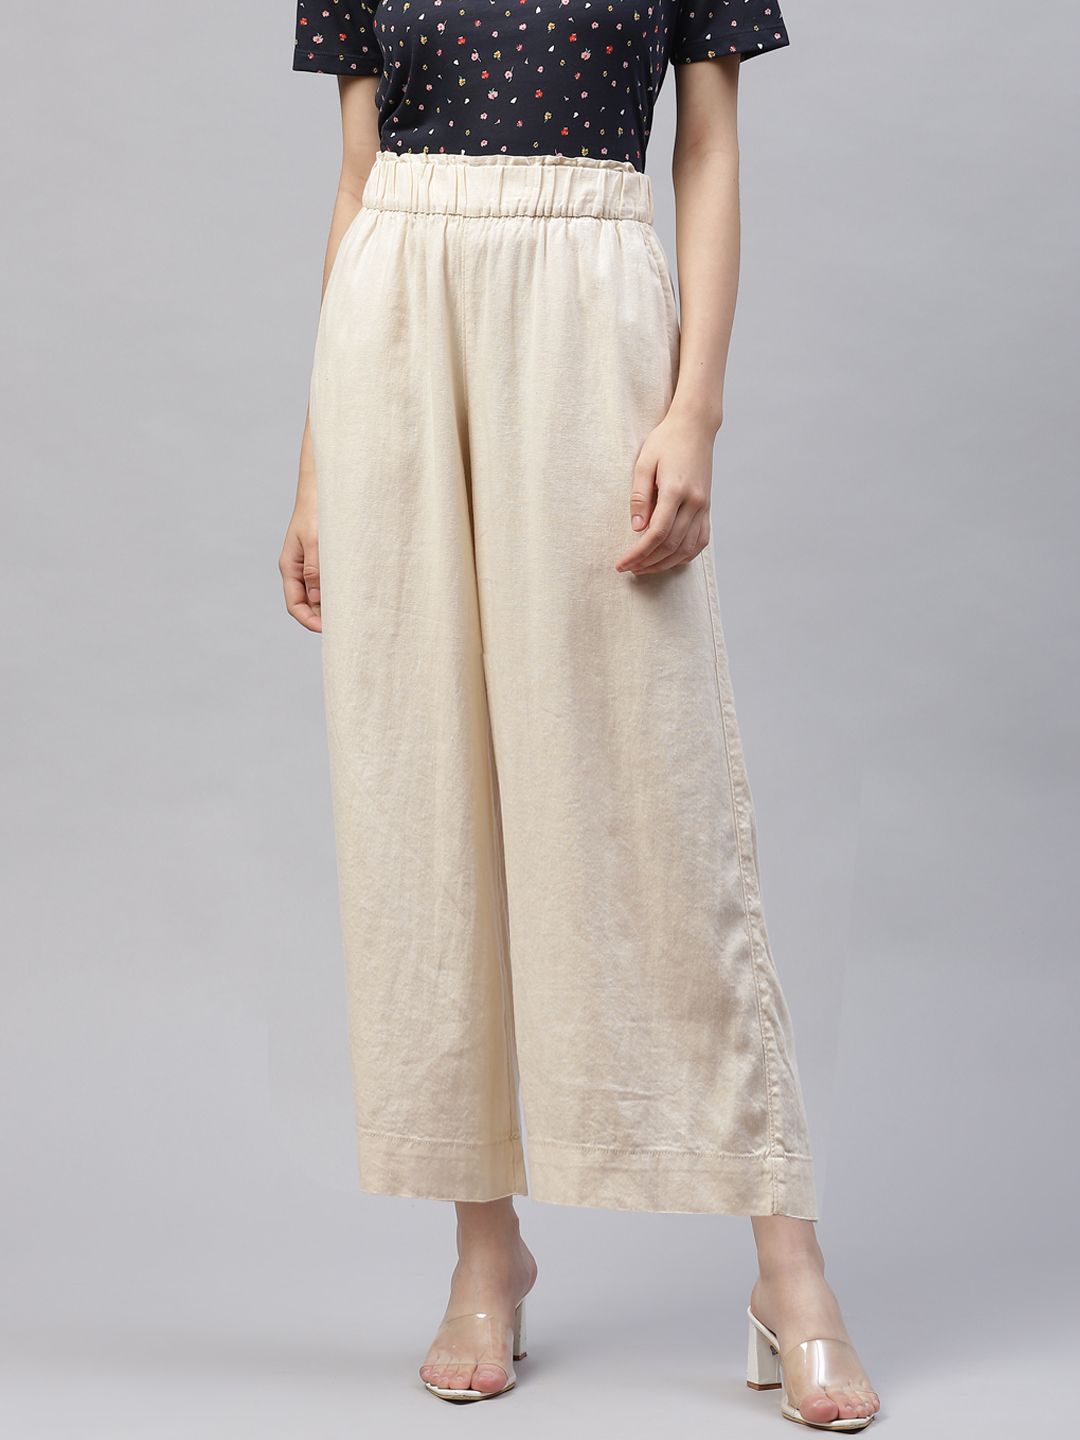 Marks & Spencer Women Cream-Coloured Solid Trousers Price in India